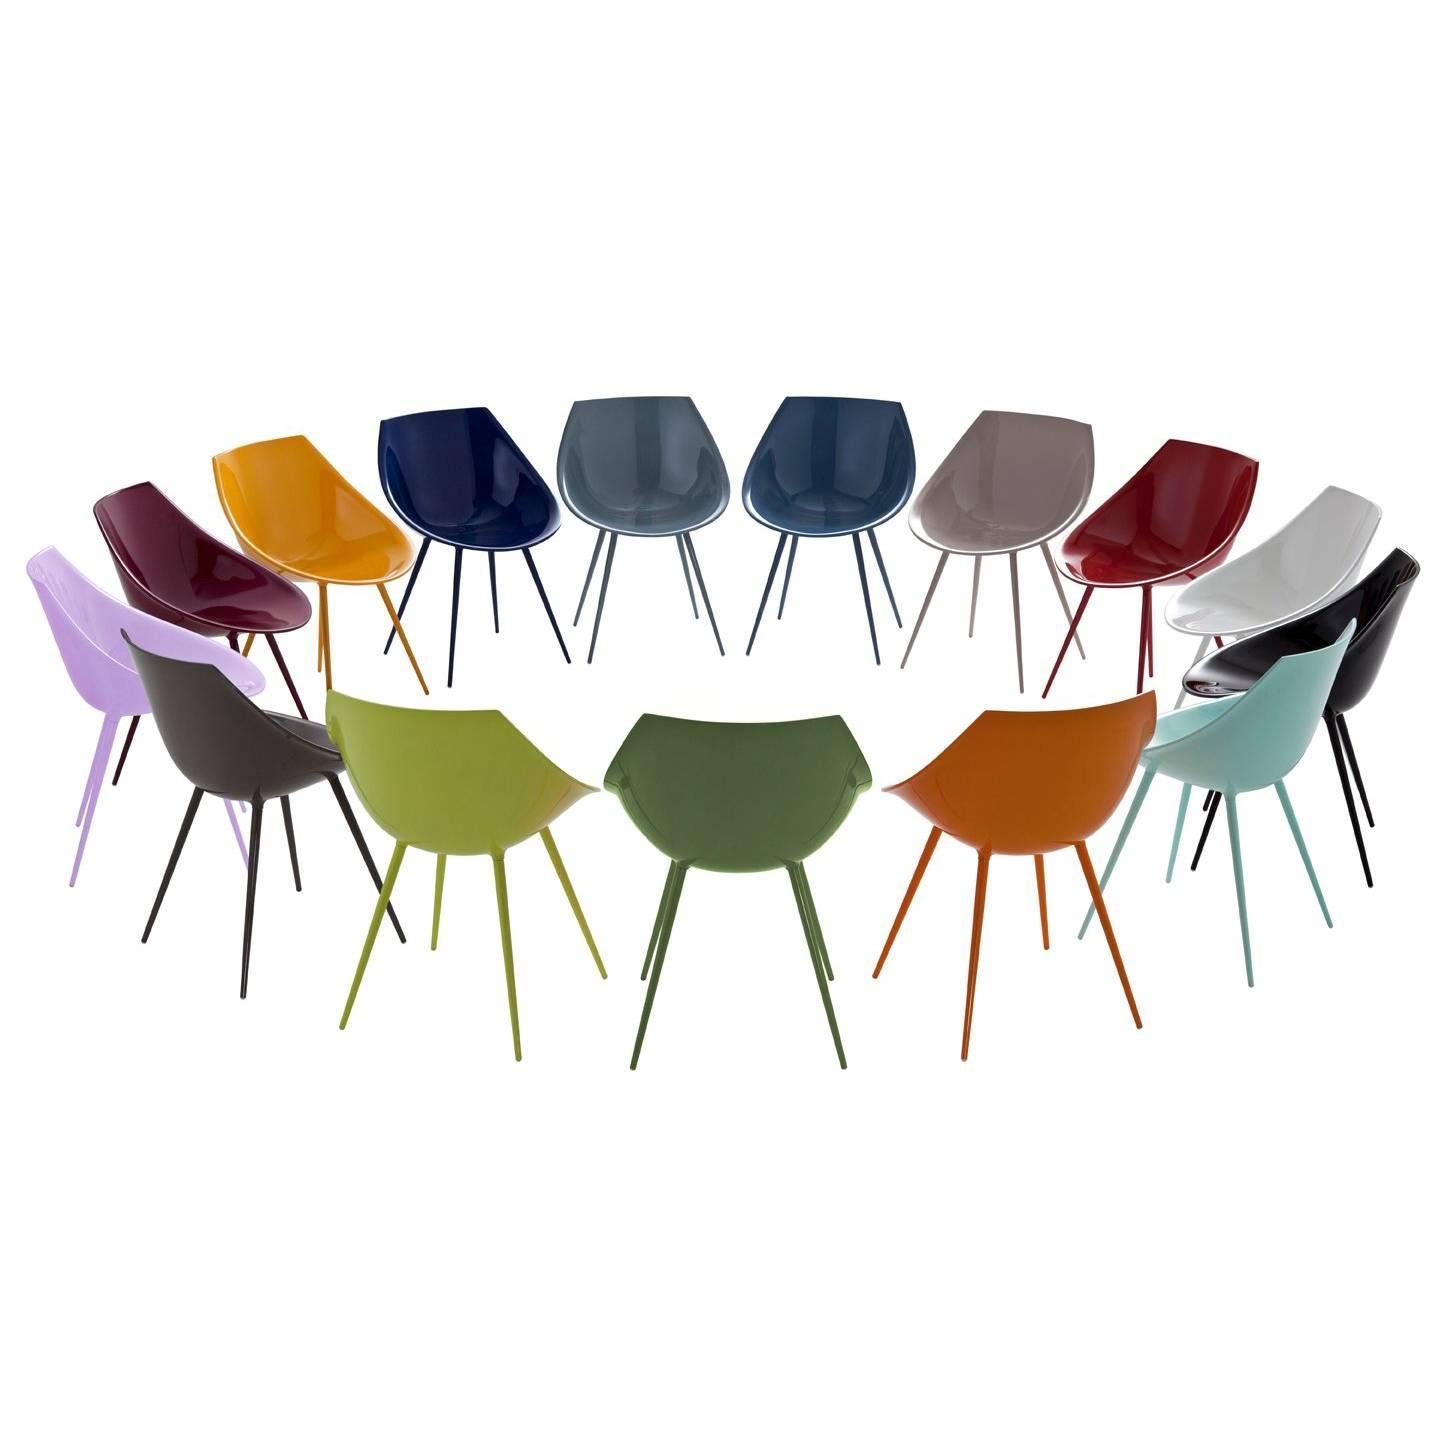 "Lago'" Lacquered Shell and Aluminum Legs Chair by Philippe Starck for Driade For Sale